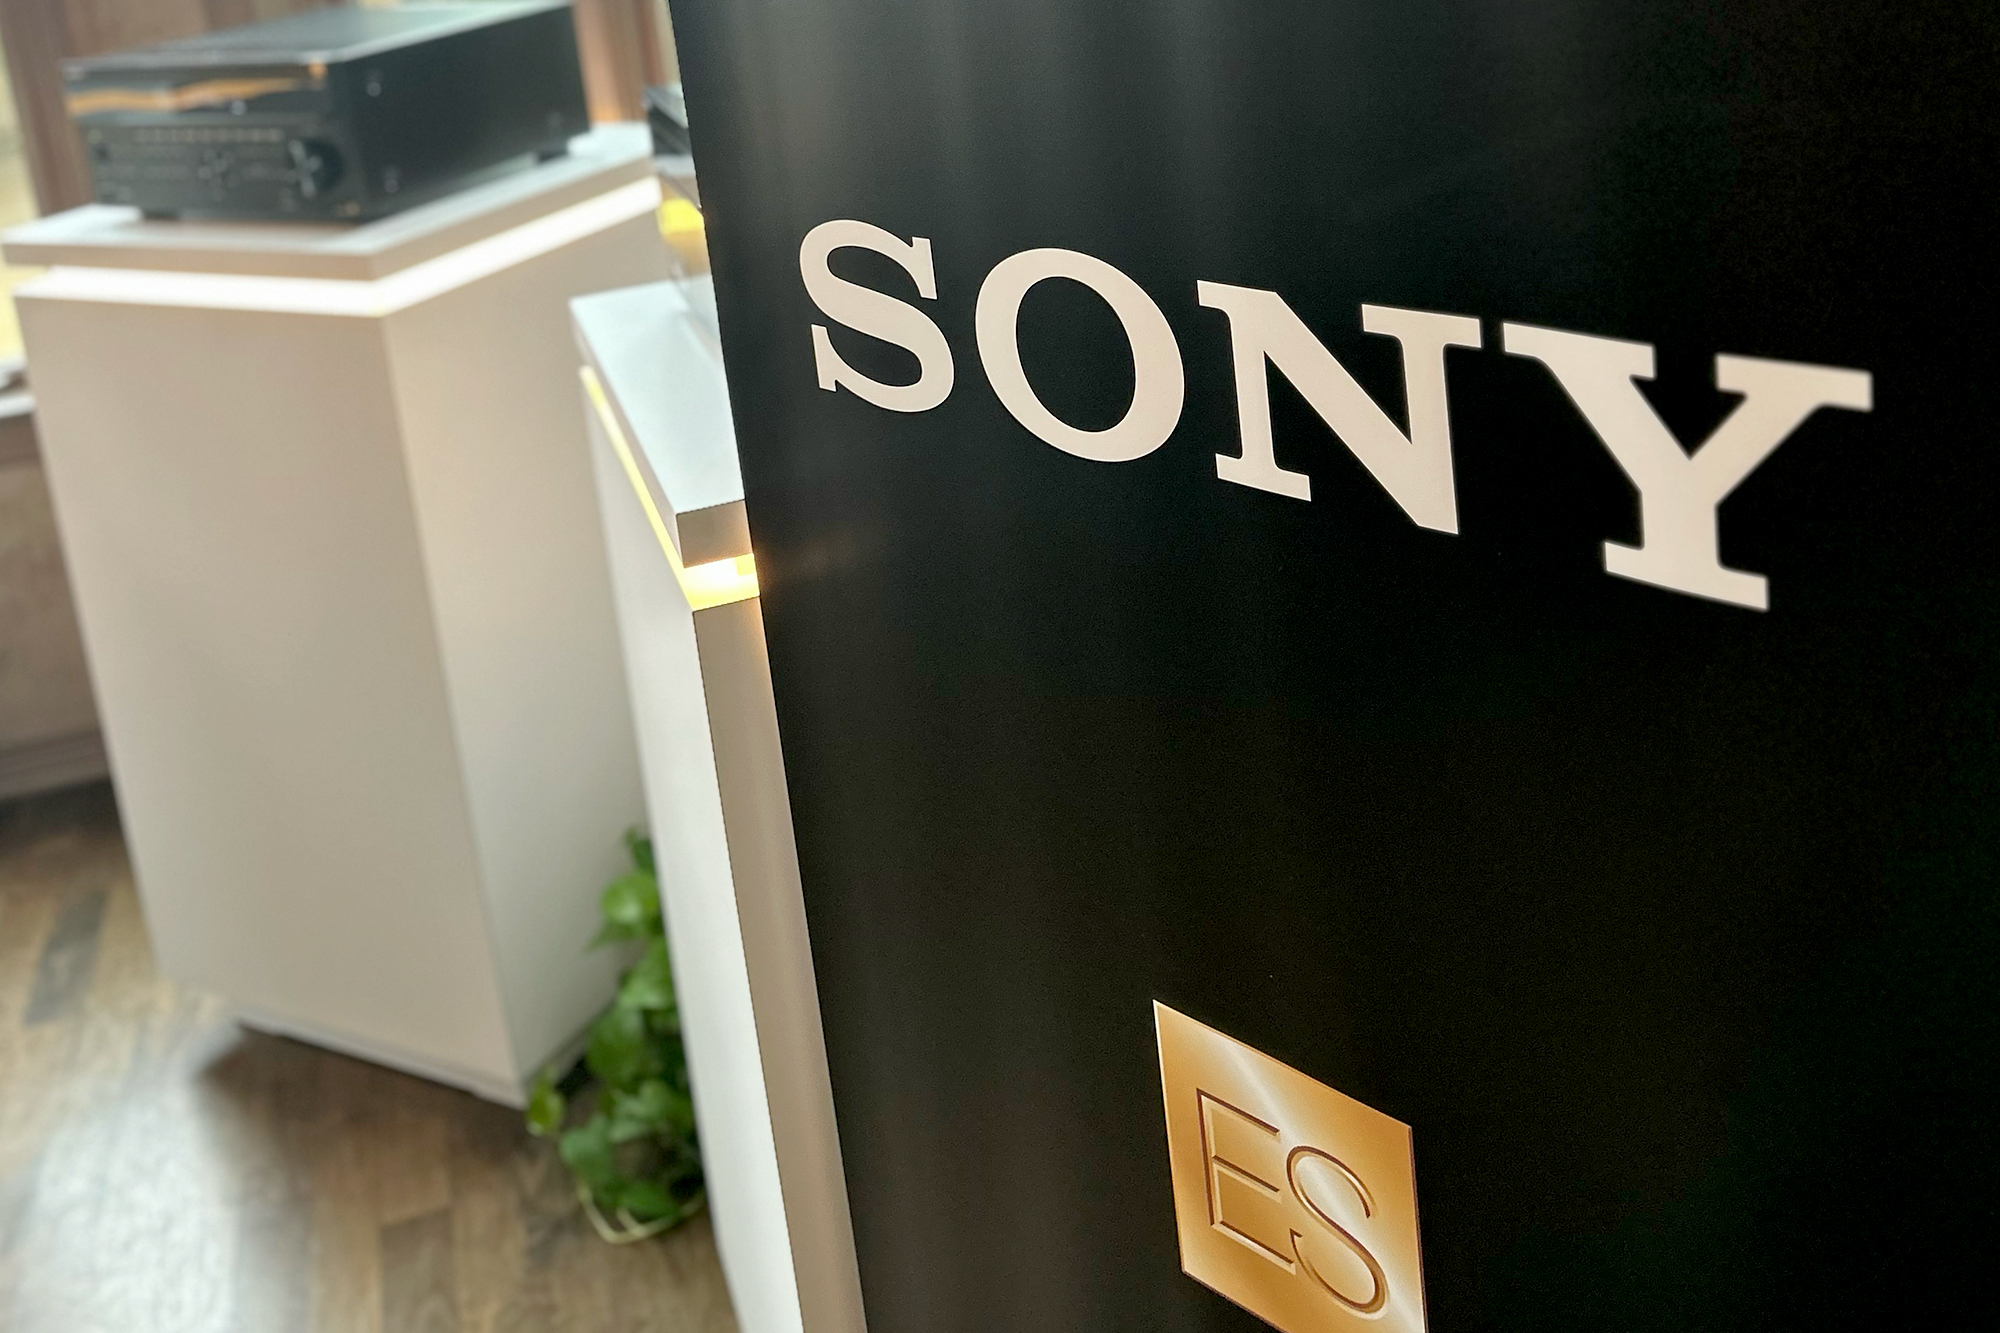 We saw Sony’s new ES receivers and Bravia XR TVs and lived to tell you about them